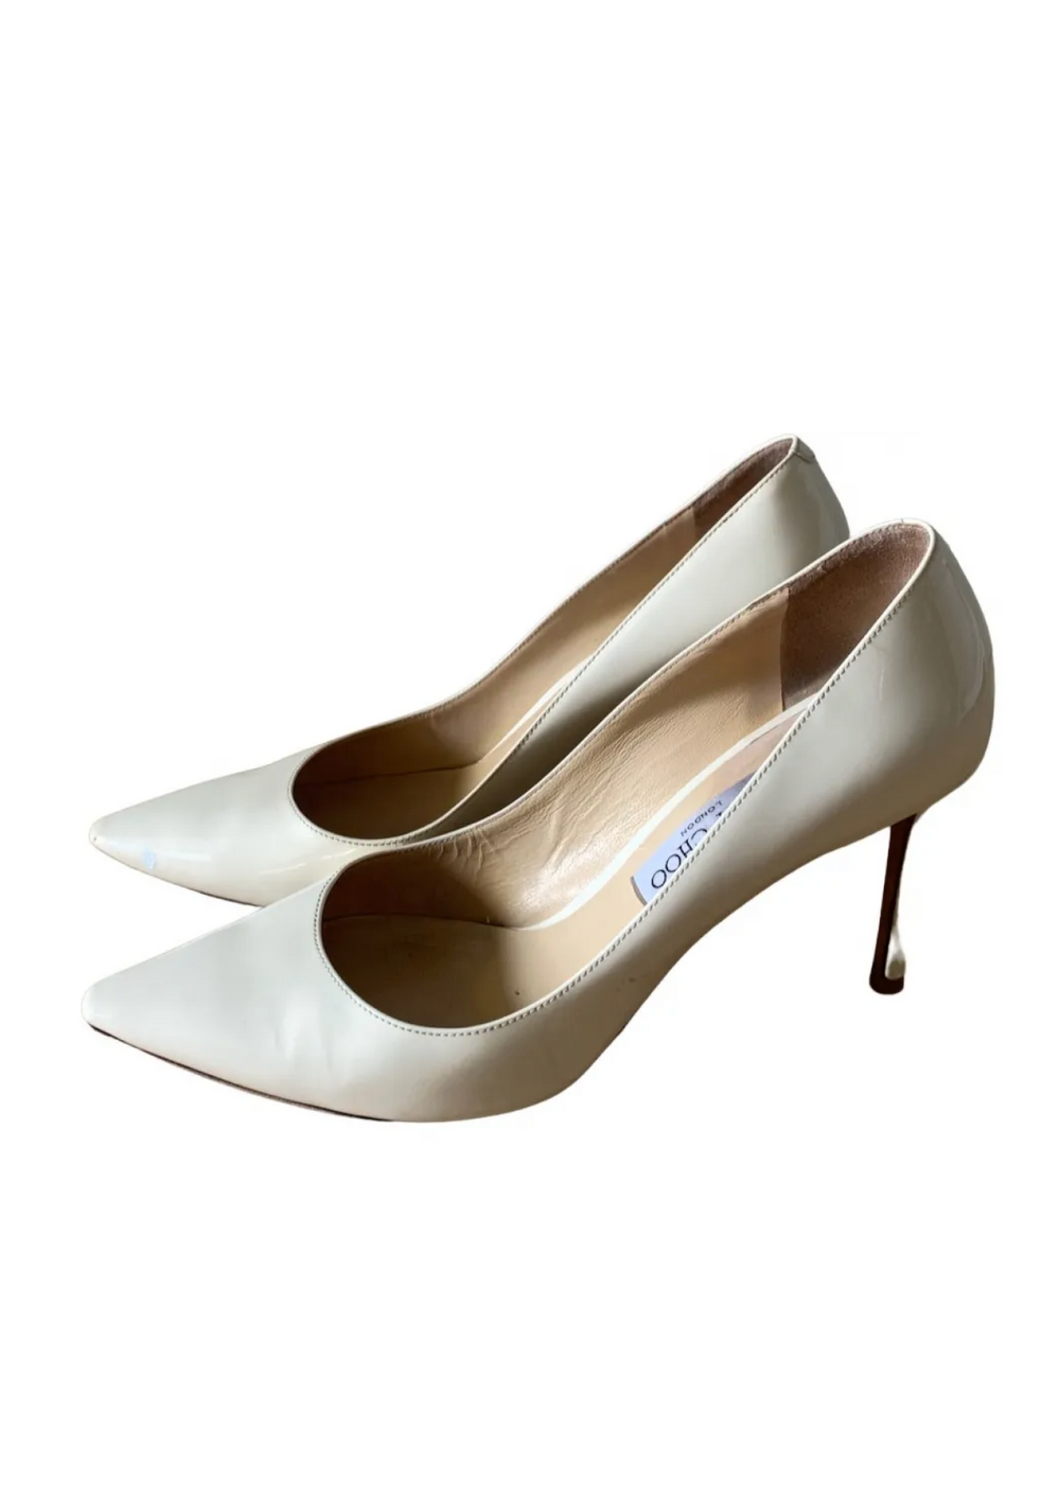 [SOLD] Jimmy Choo White Patent Leather Pumps